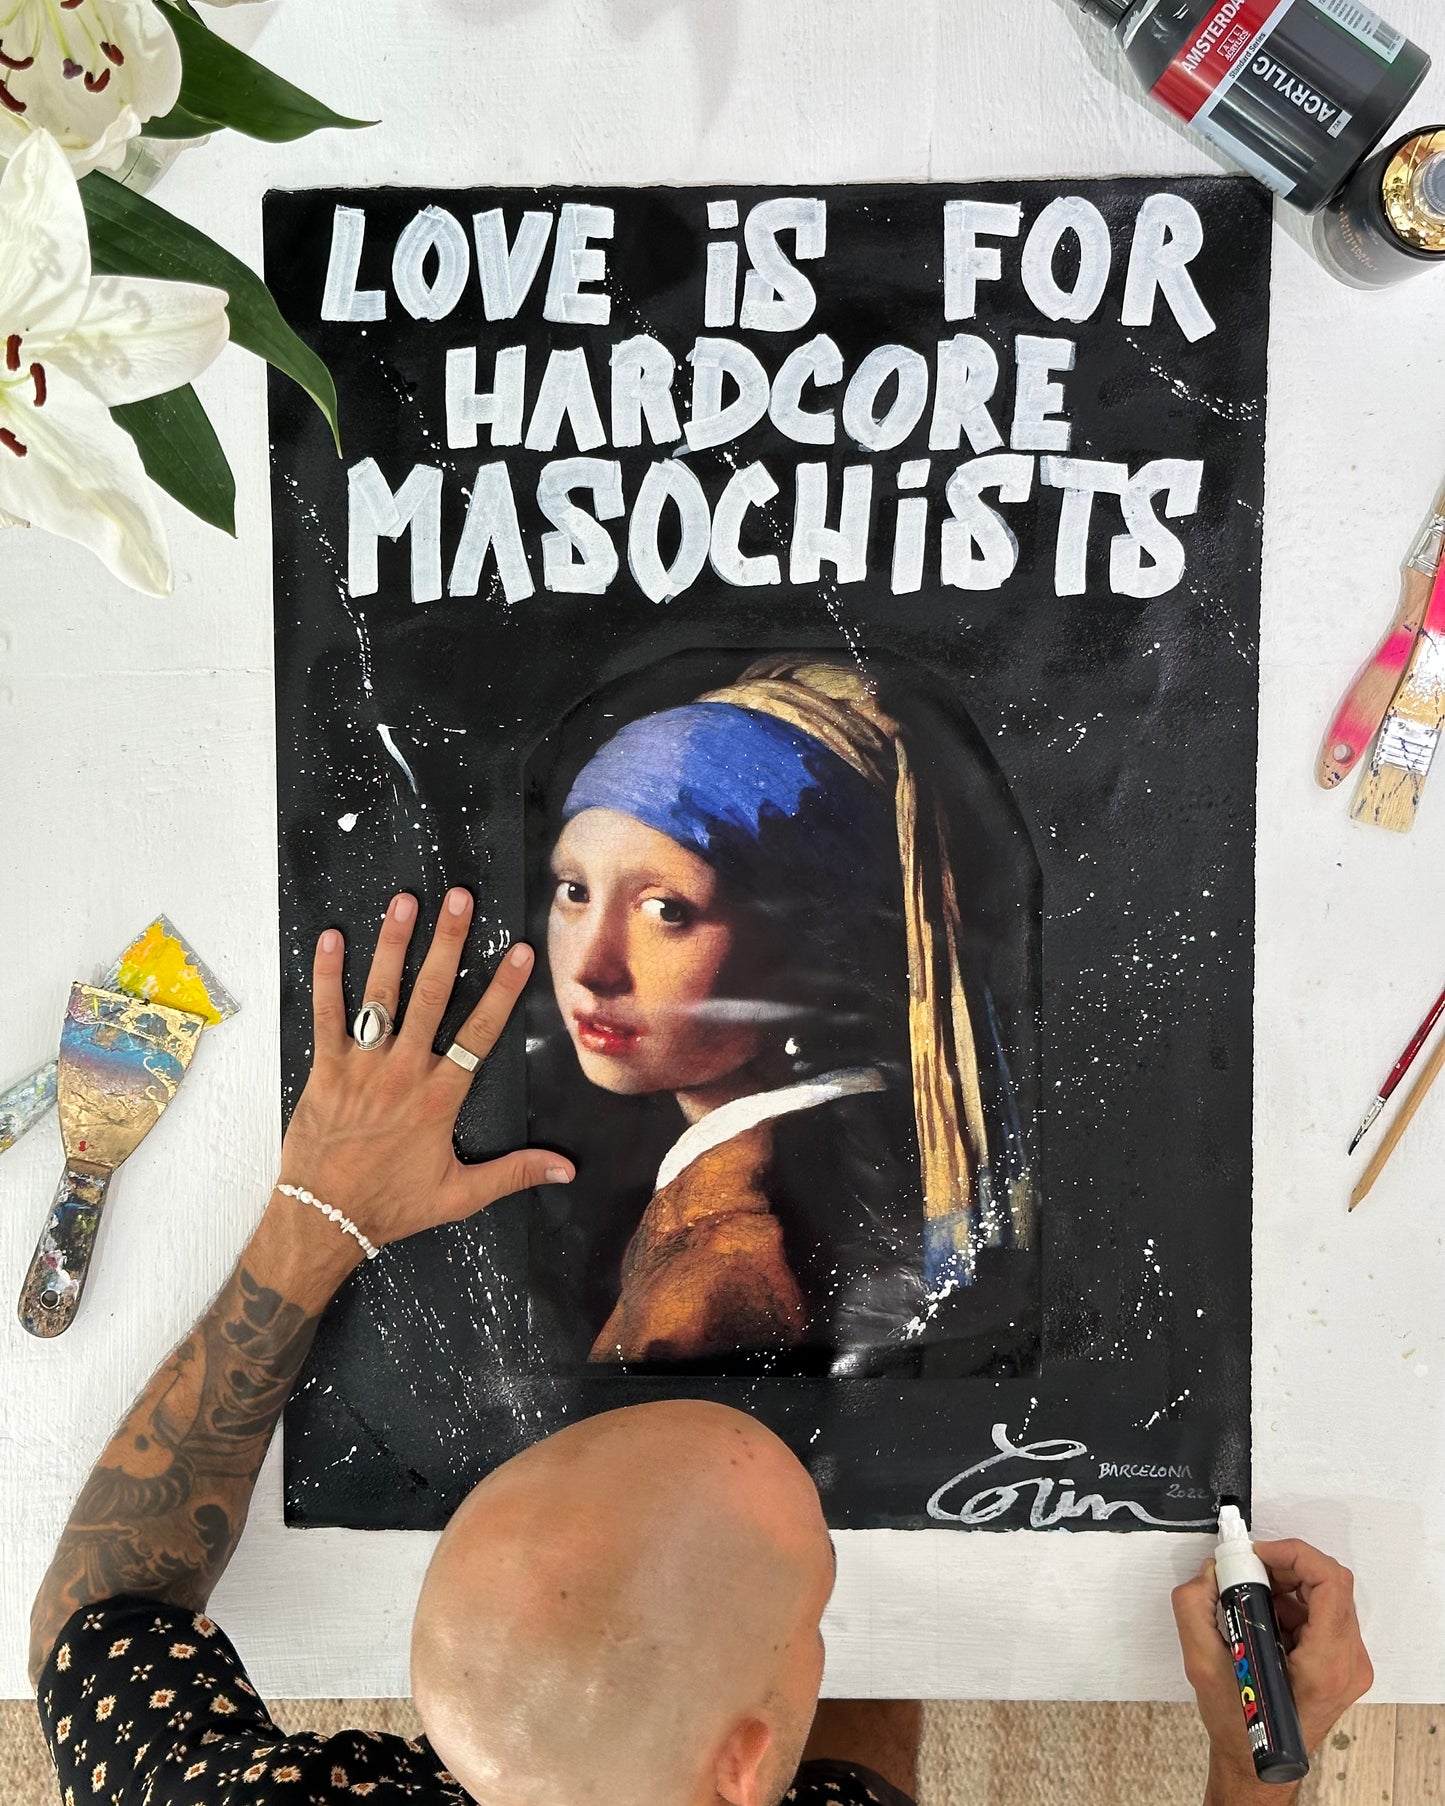 LOVE IS FOR HARDCORE MASOCHISTS - PEARL